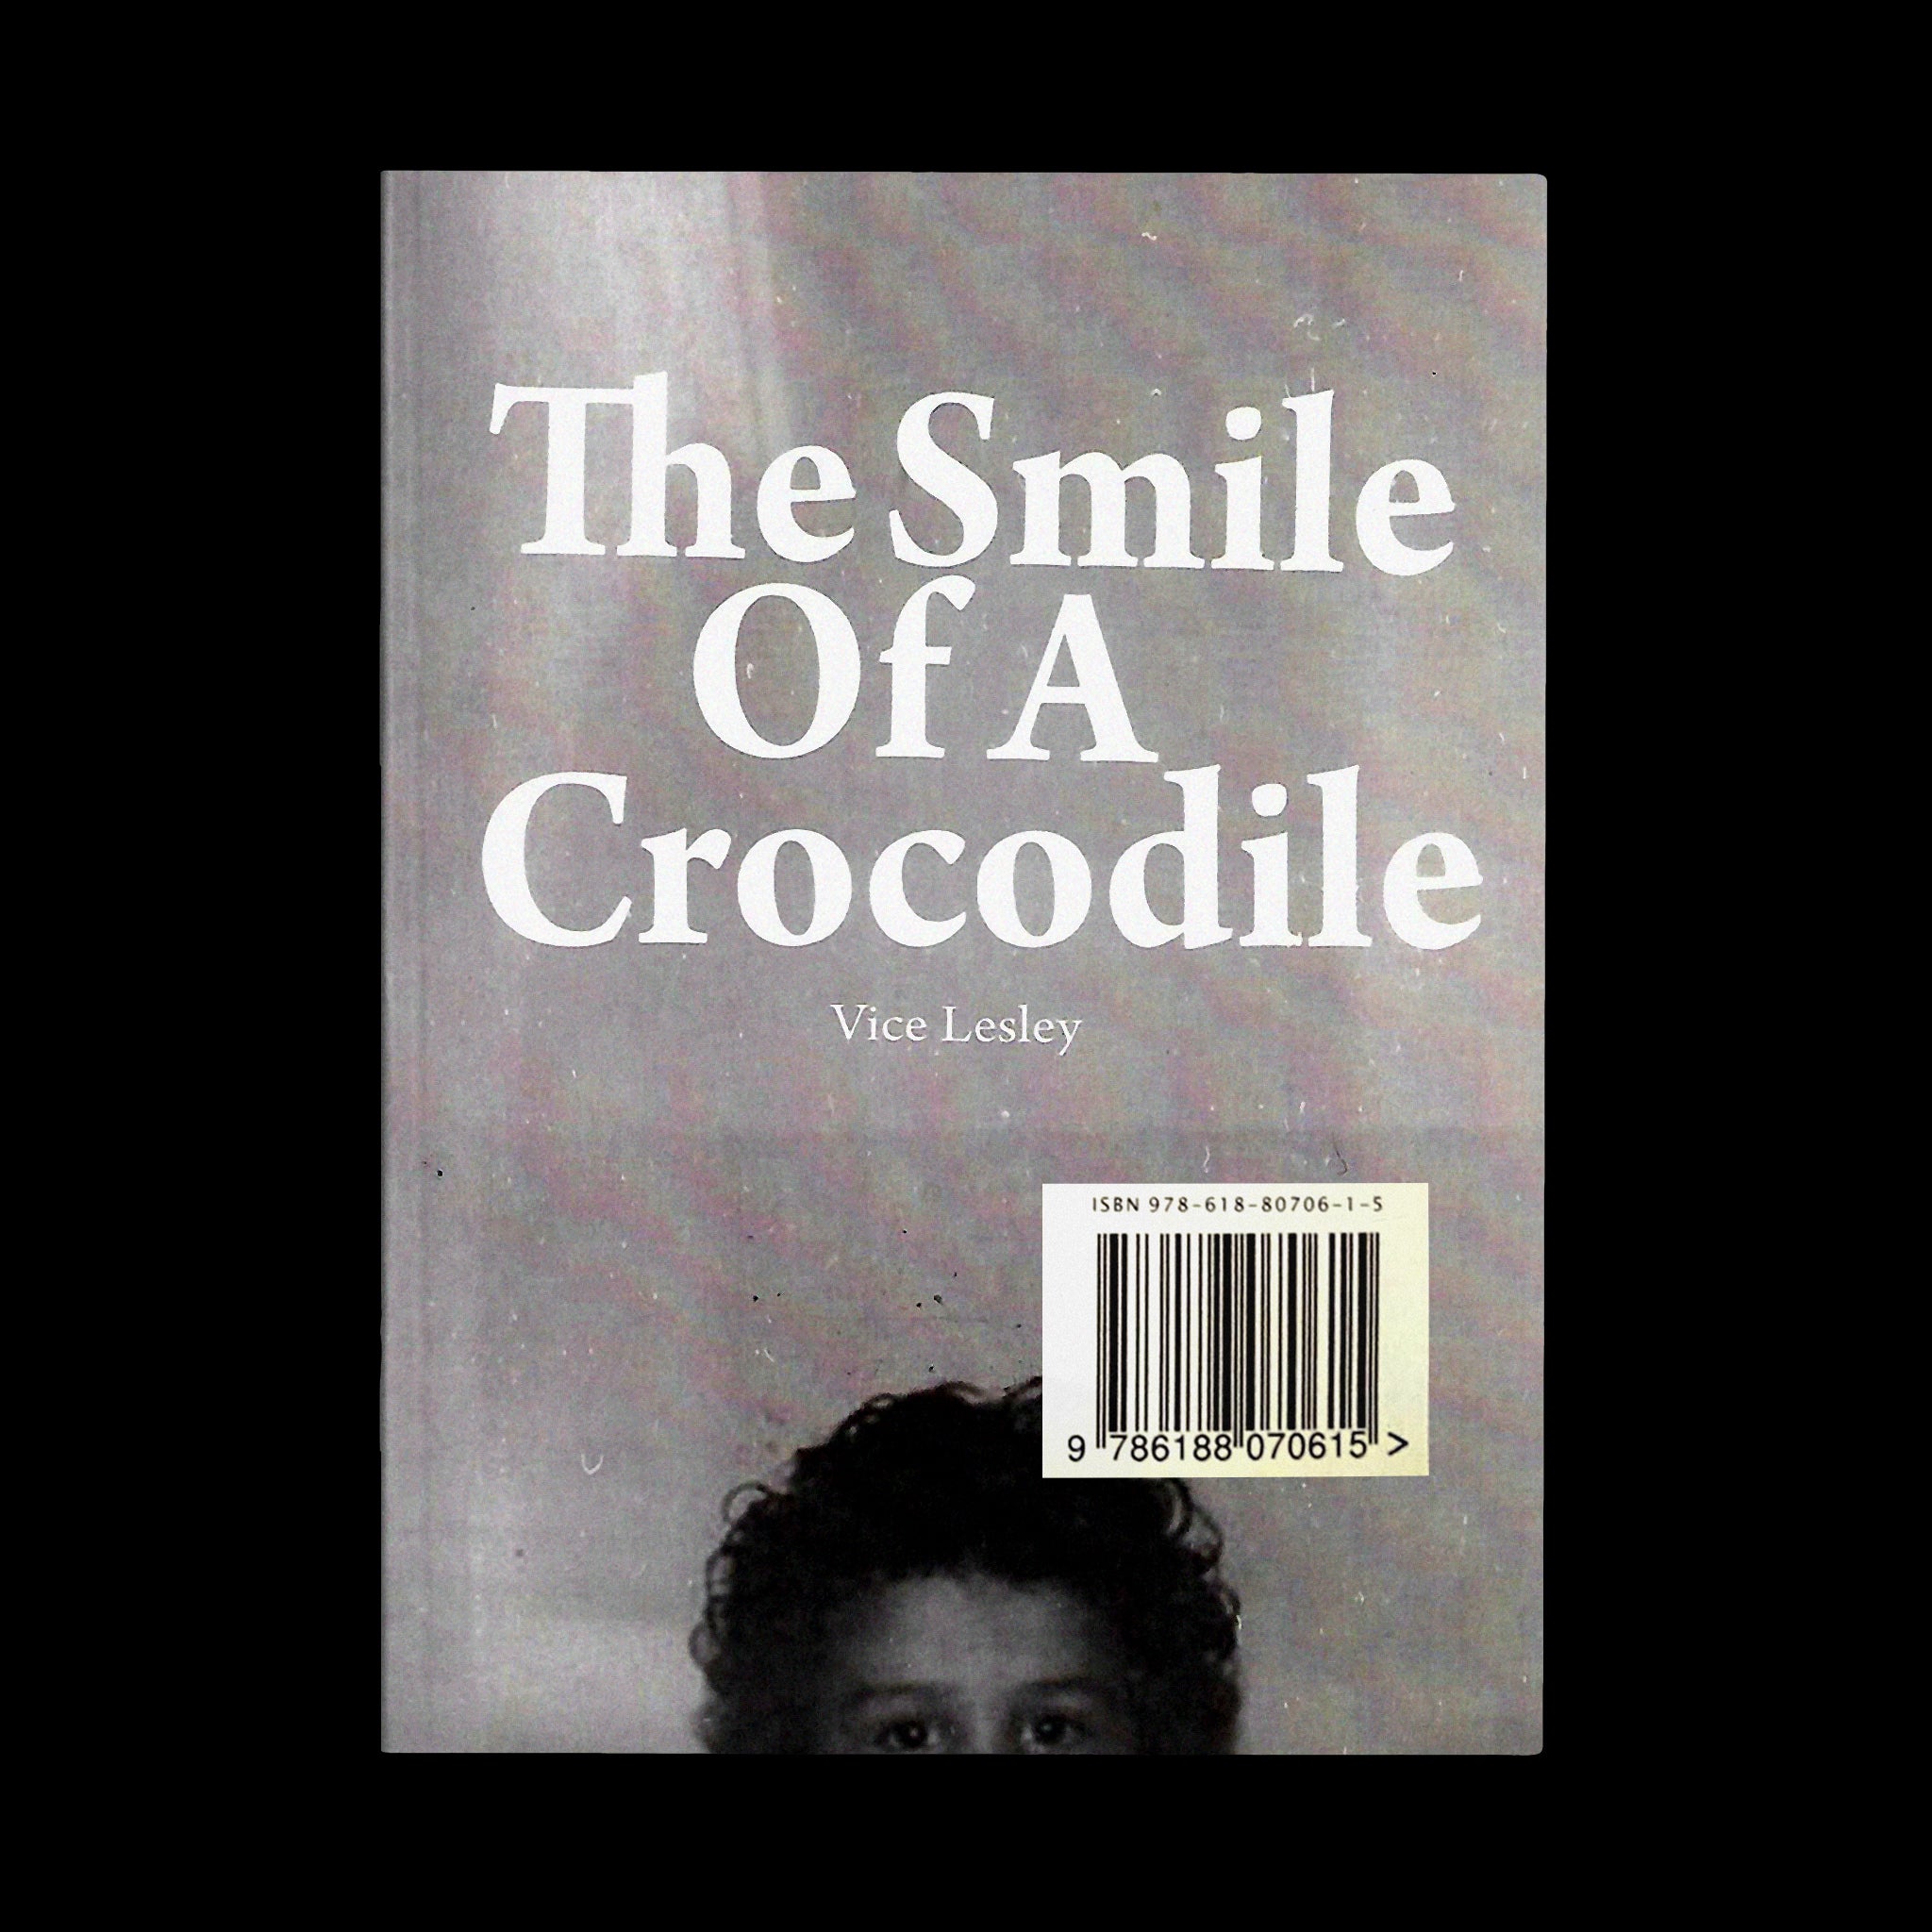 Vice Lesley: The Smile of a Crocodile